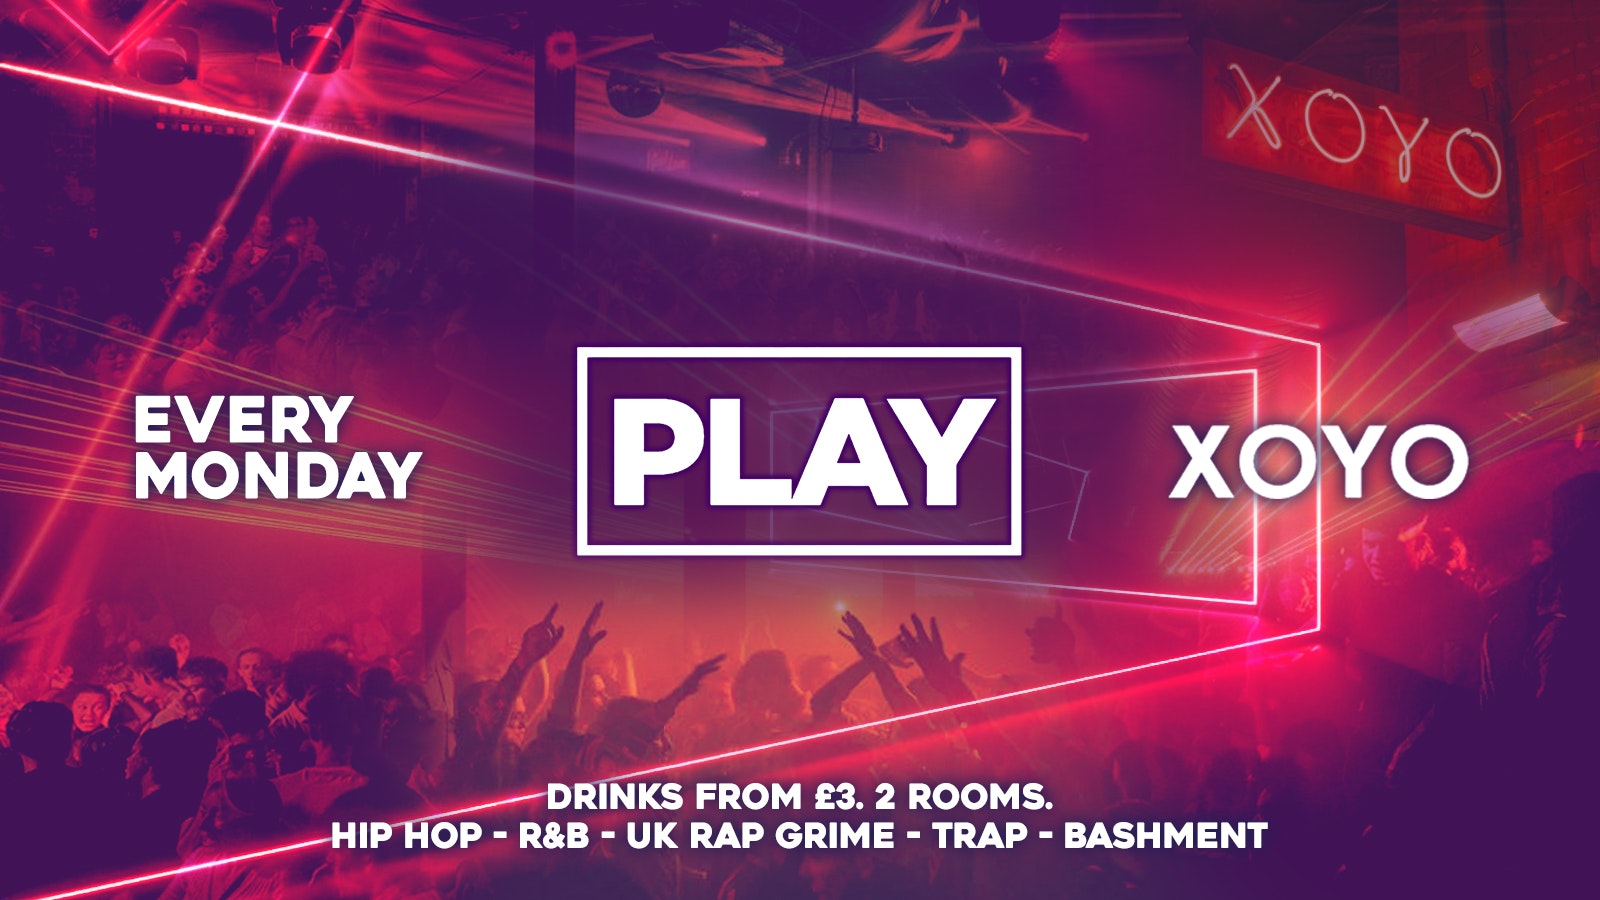 [END OF EXAMS SPECIAL] – Play @ XOYO – The Biggest Weekly Monday Student Night in London!